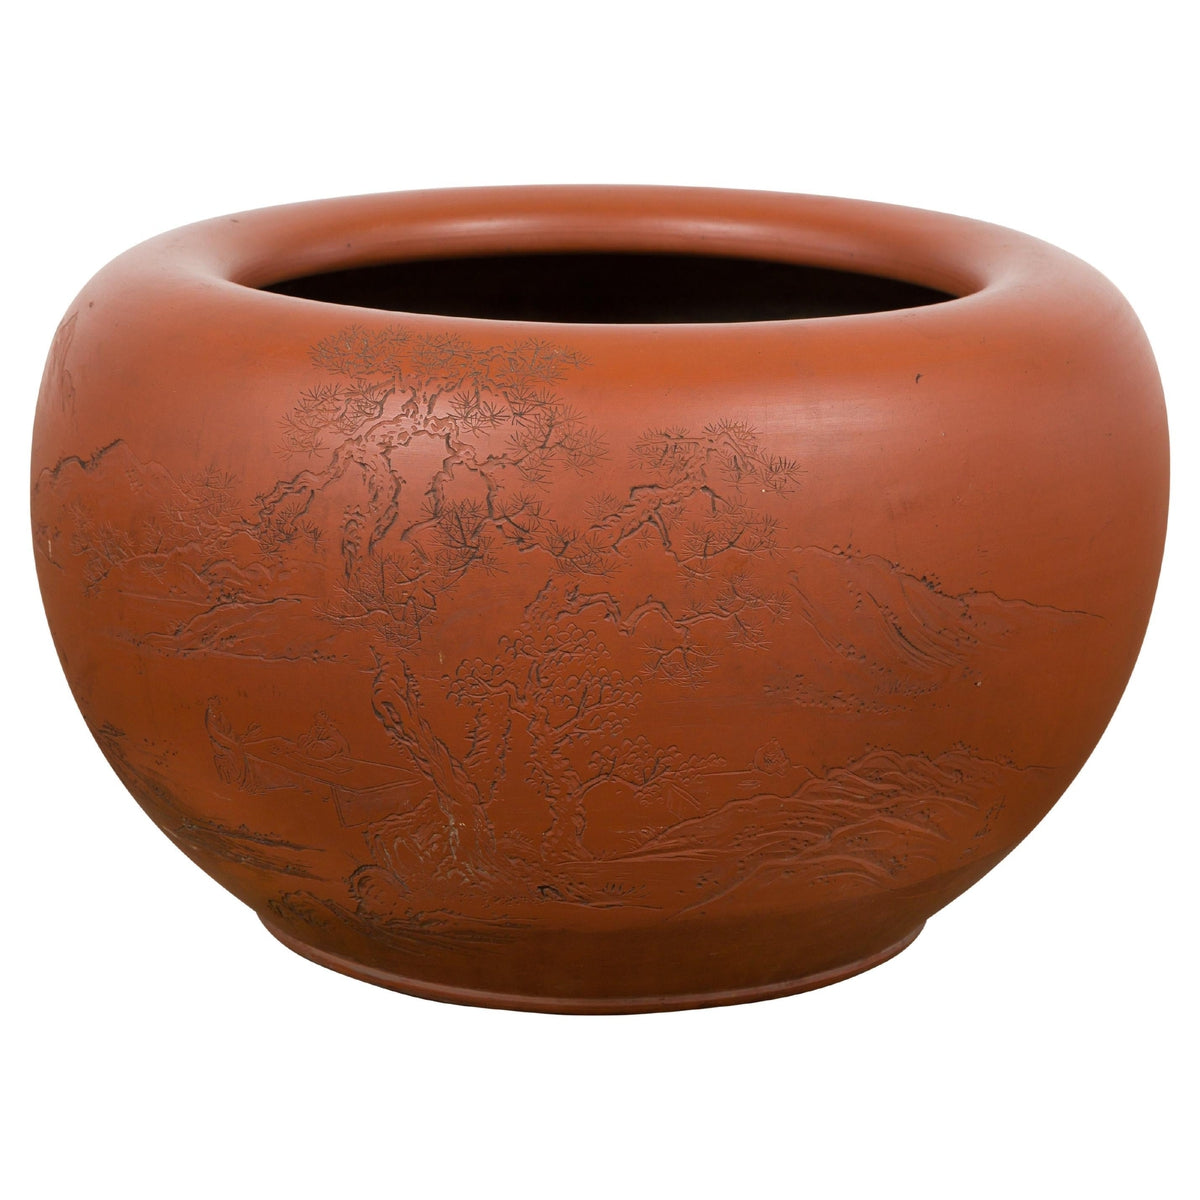 Orange Circular Antique Planter with Etched Design-YN7819-1. Asian & Chinese Furniture, Art, Antiques, Vintage Home Décor for sale at FEA Home